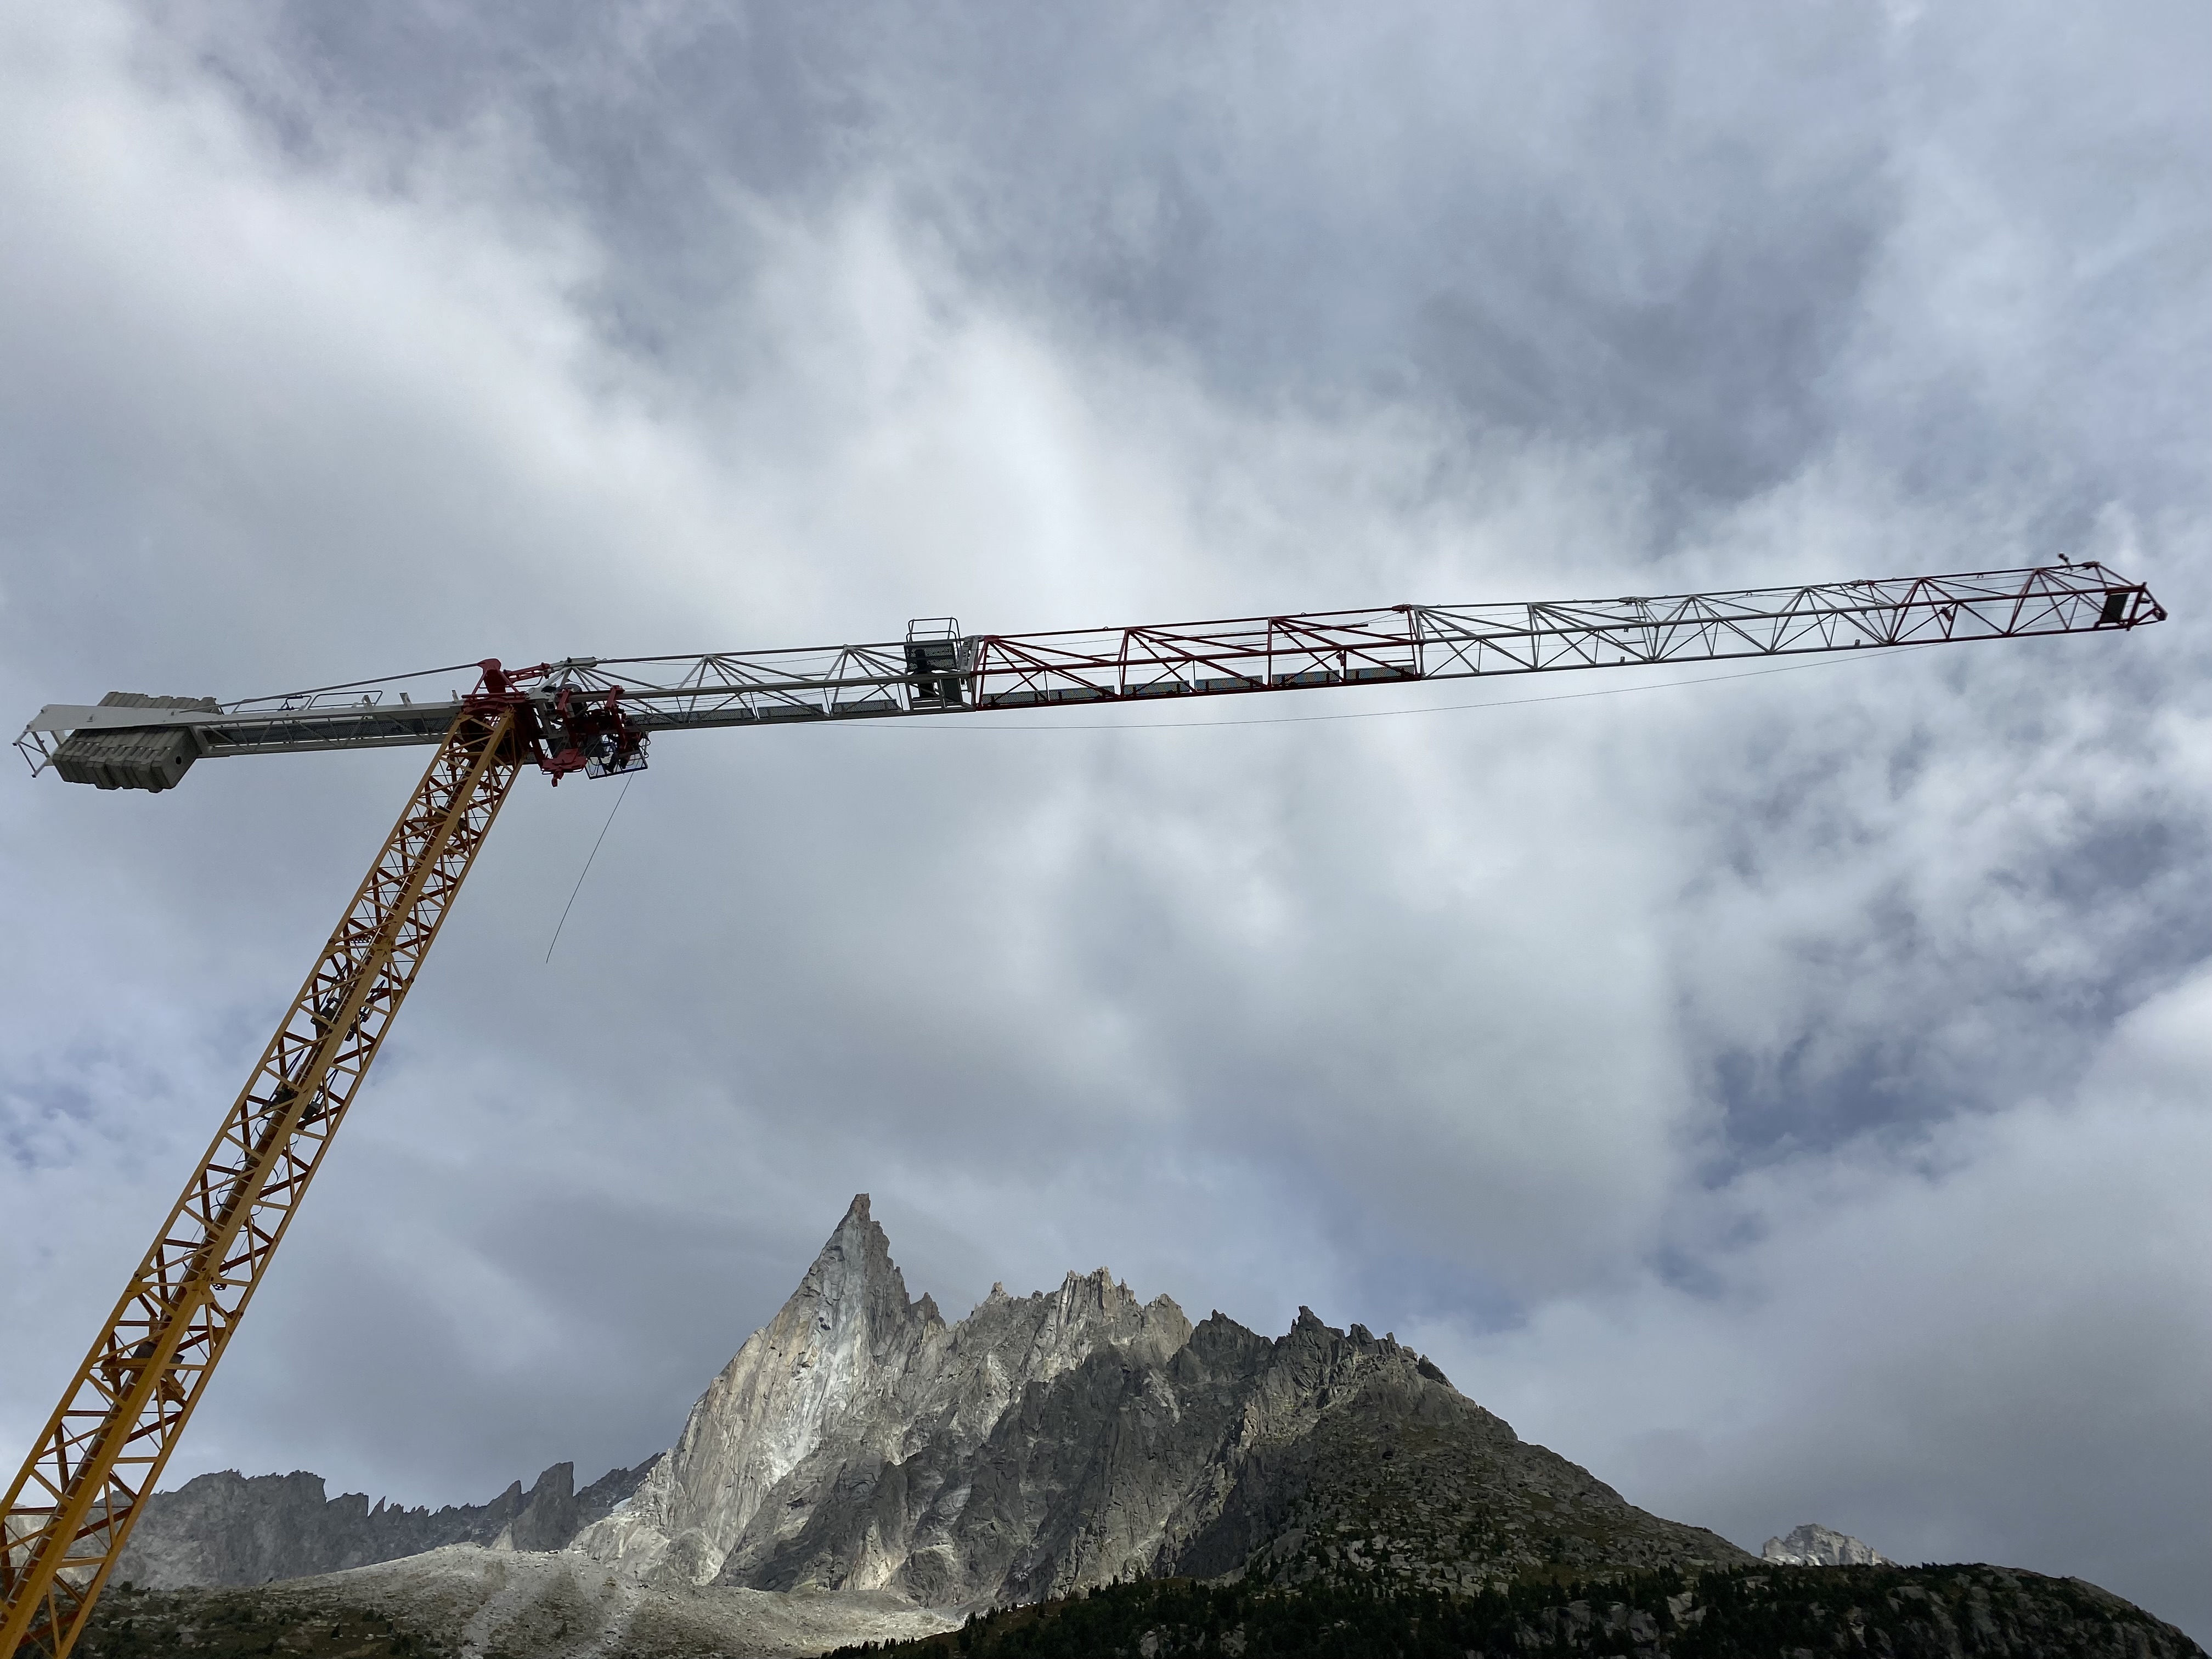 Potain MDT 109 cranes assembled by helicopter on French glacier